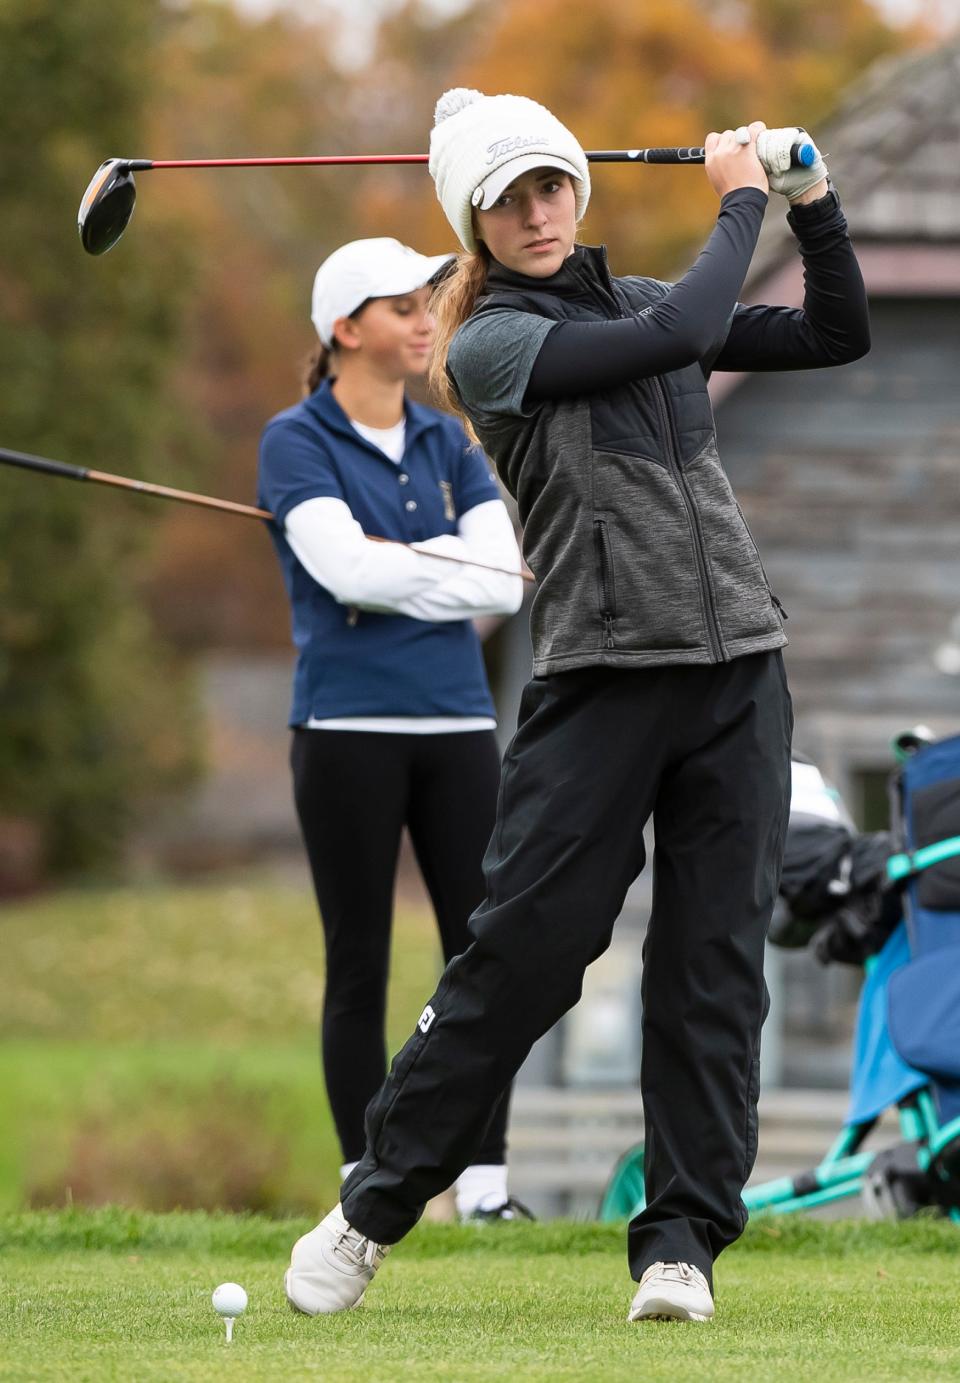 Souderton's Alli Engart gets in a practice swing during the second and final round of the PIAA Class 3A girls individual golf championships at Penn State University's Blue Course Tuesday, Oct. 17, 2023, in State College, Pa.